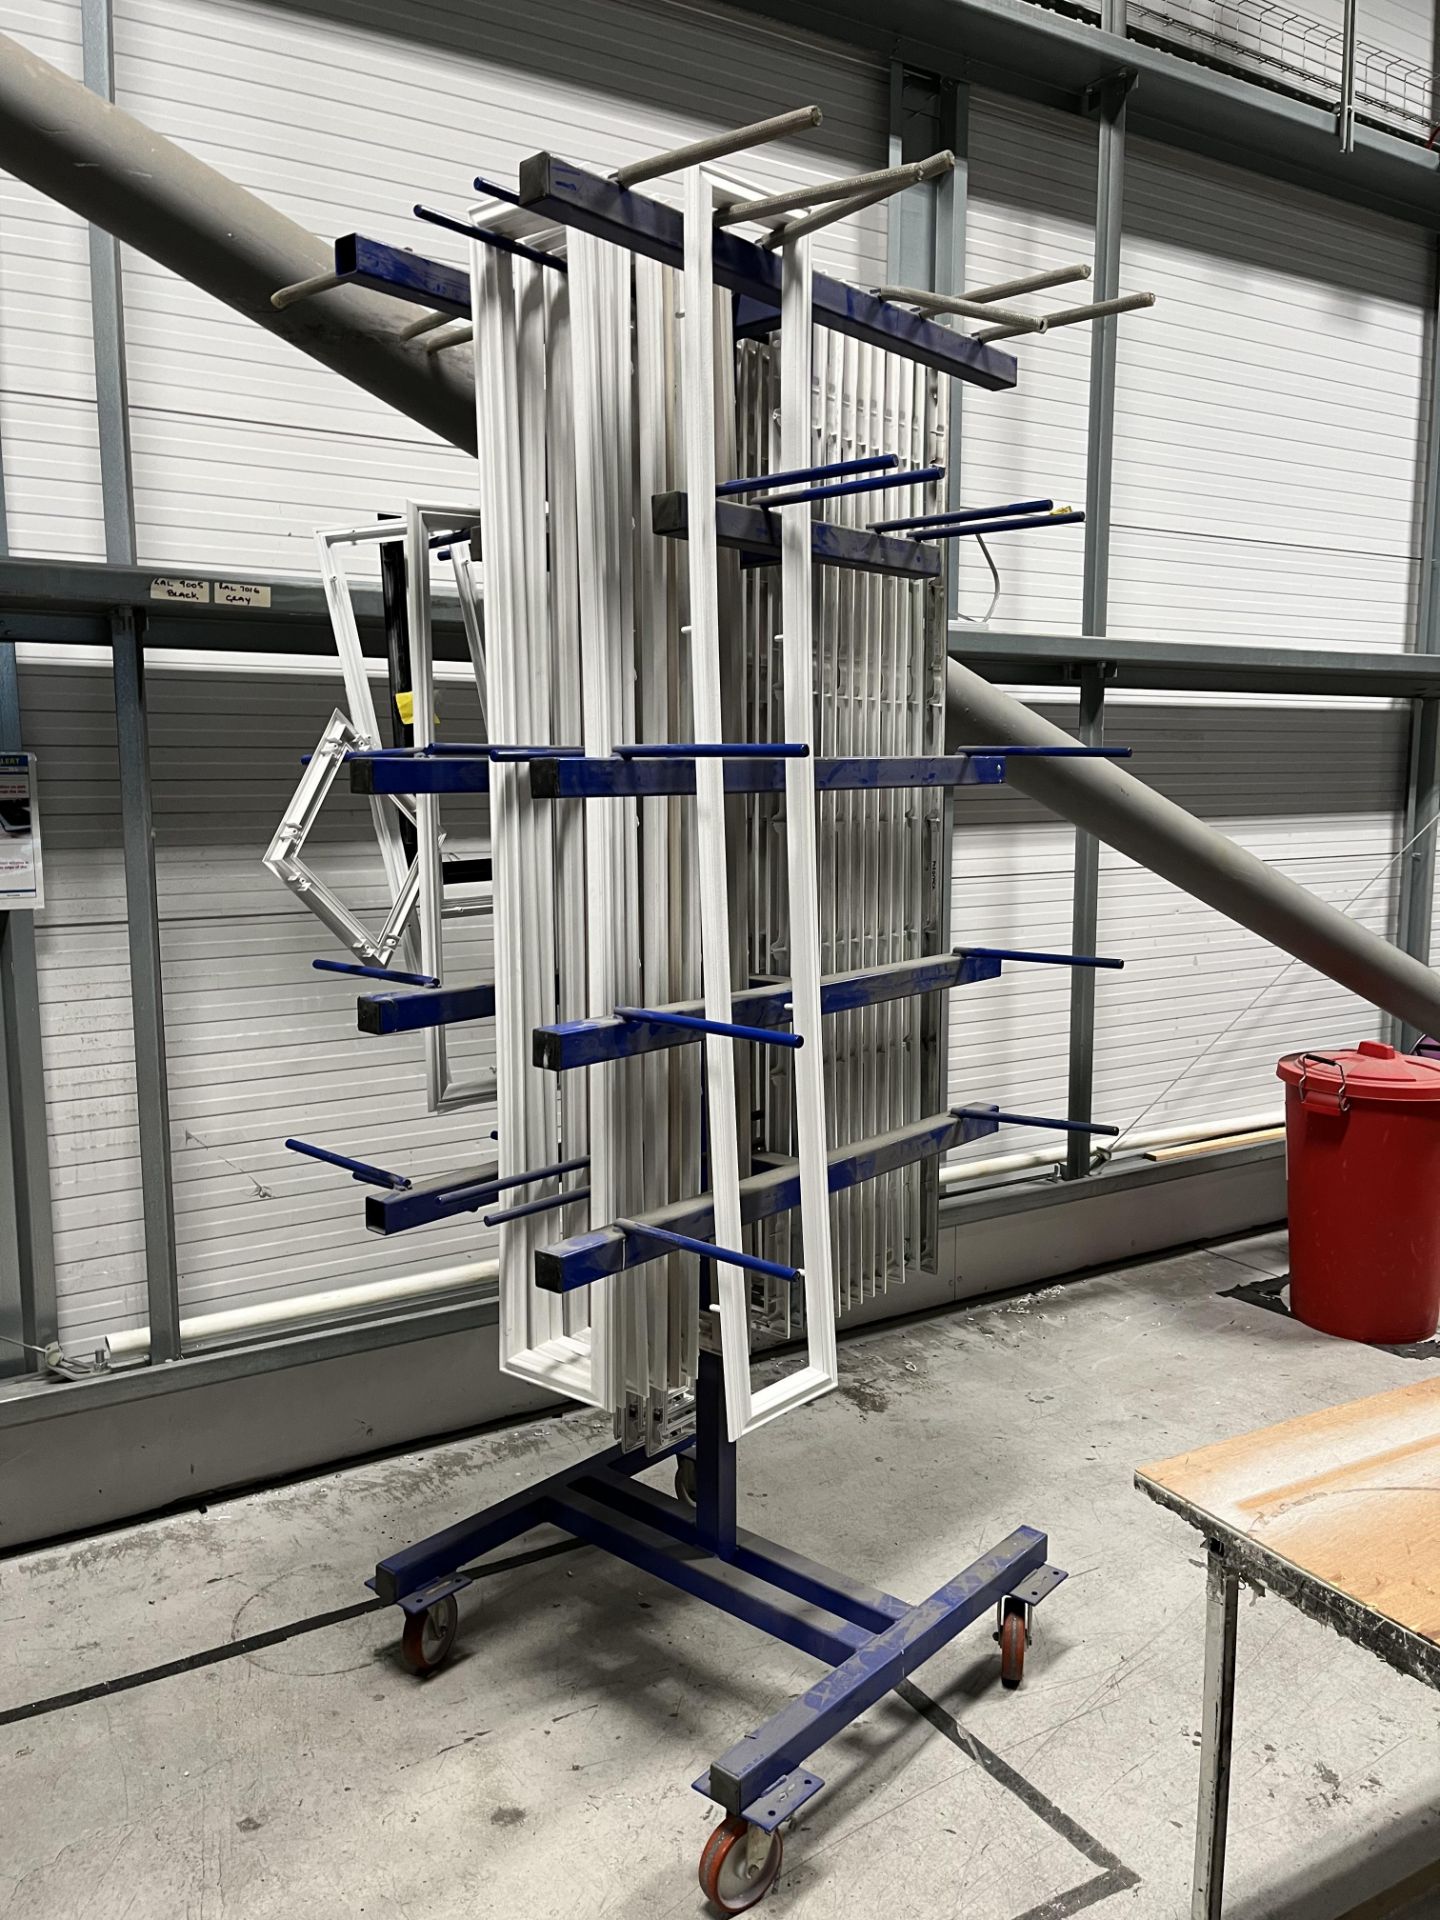 3, Steel fabricated 'xmas tree' window frame component storage trolleys, Apprx sixe 2.2Hx1x1mtrs - Image 2 of 3